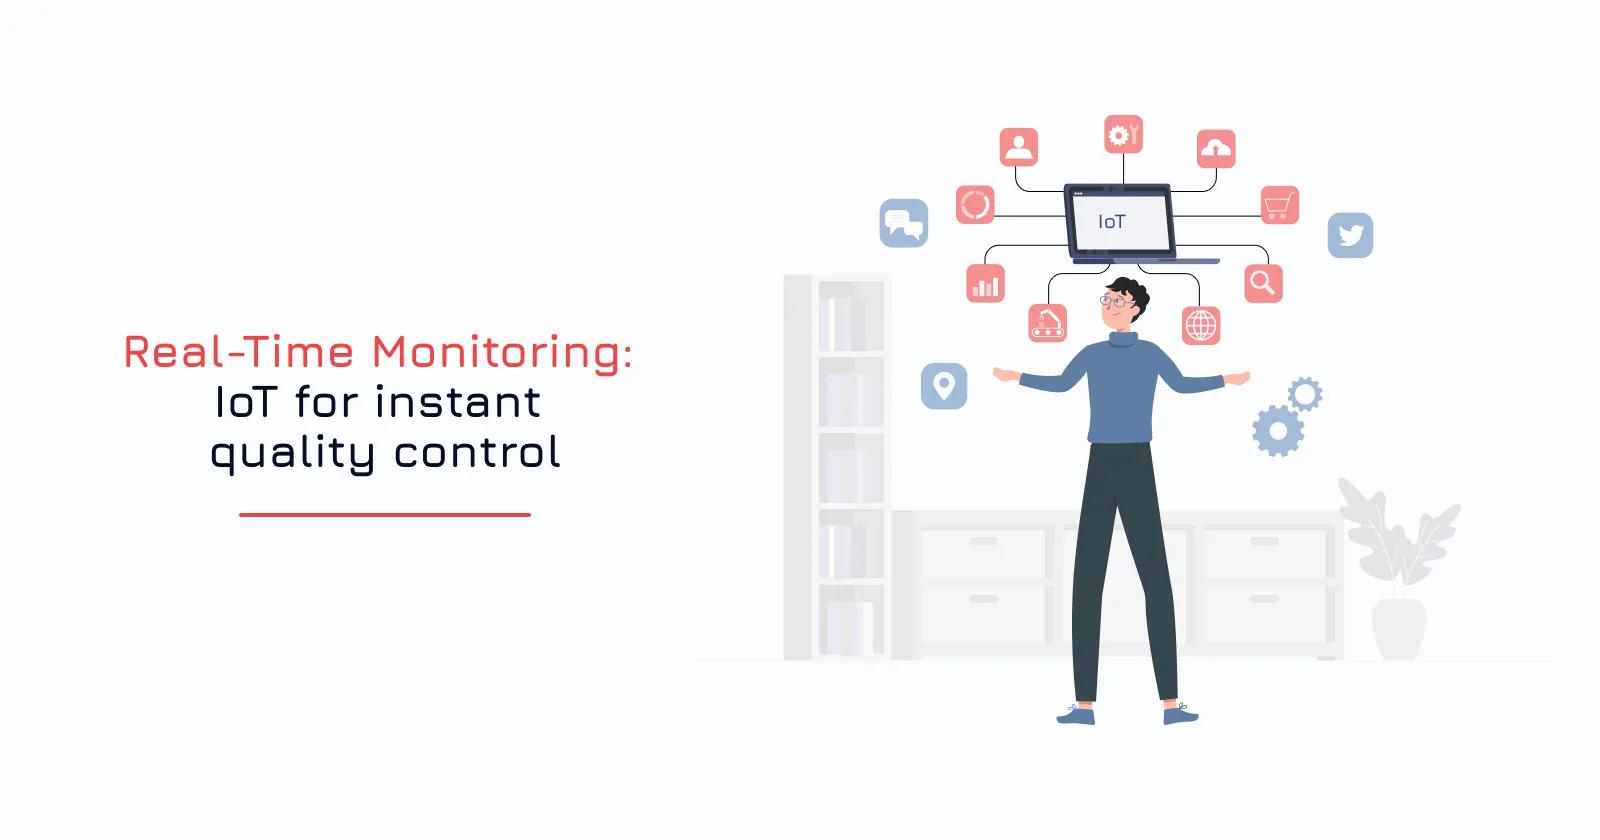 Real-Time Monitoring: IoT for instant quality control